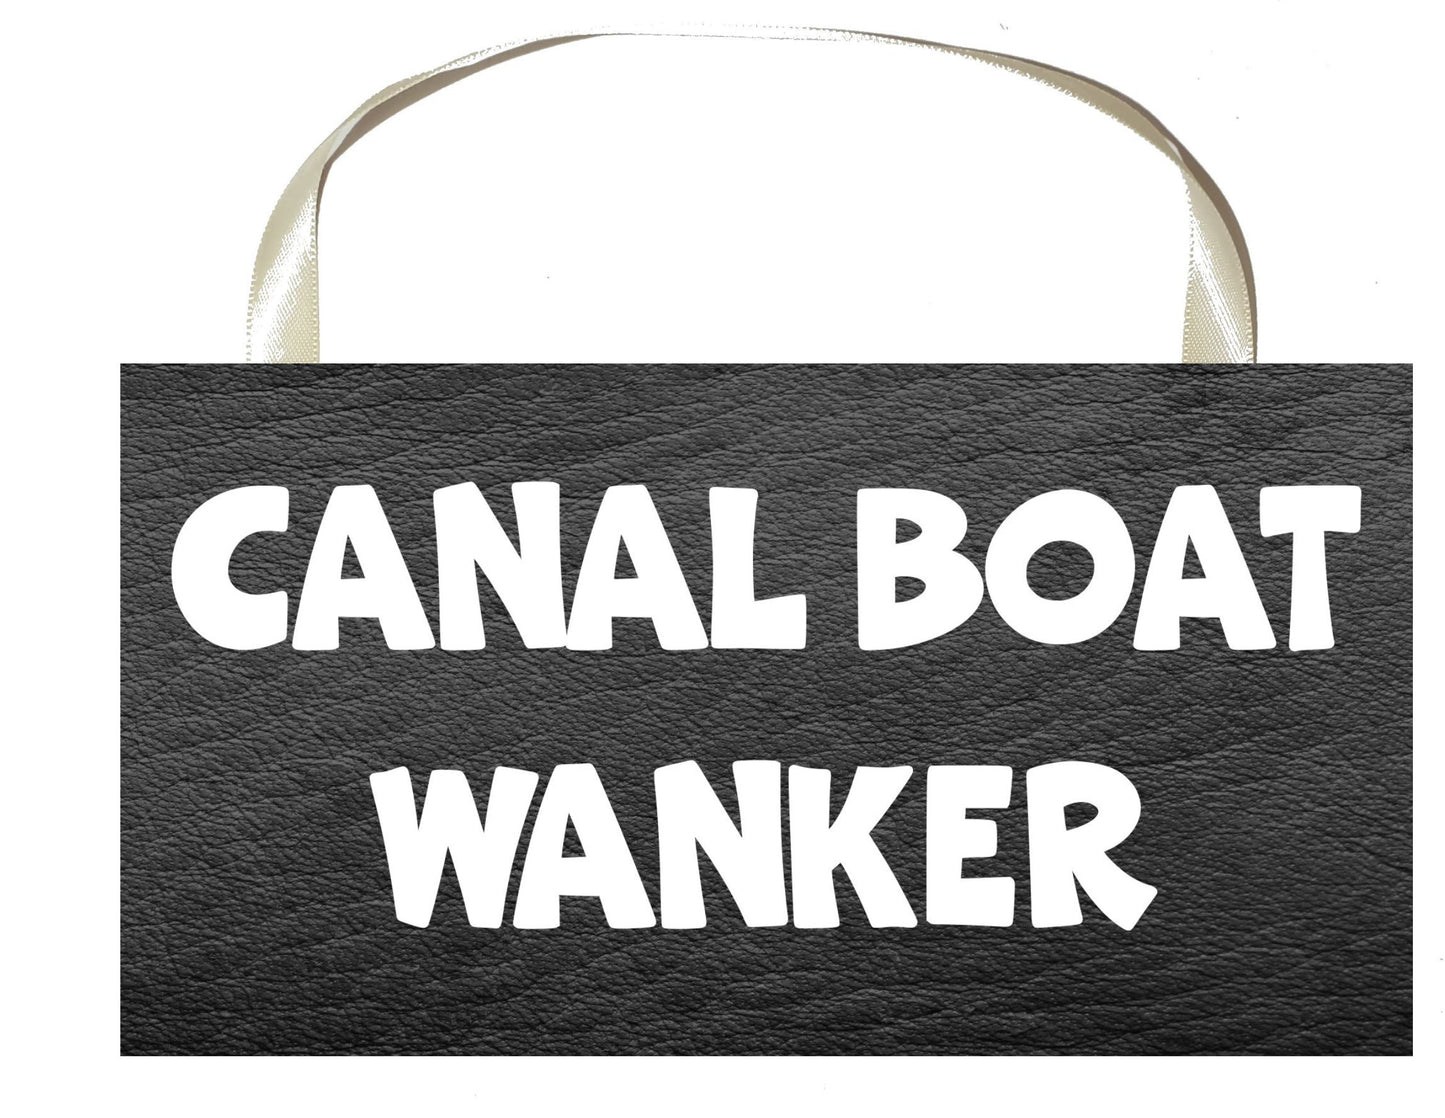 Boating Plaque / Sign Gift - Canal Boat Wanker - Rude Cheeky Cute Fun Novelty Present